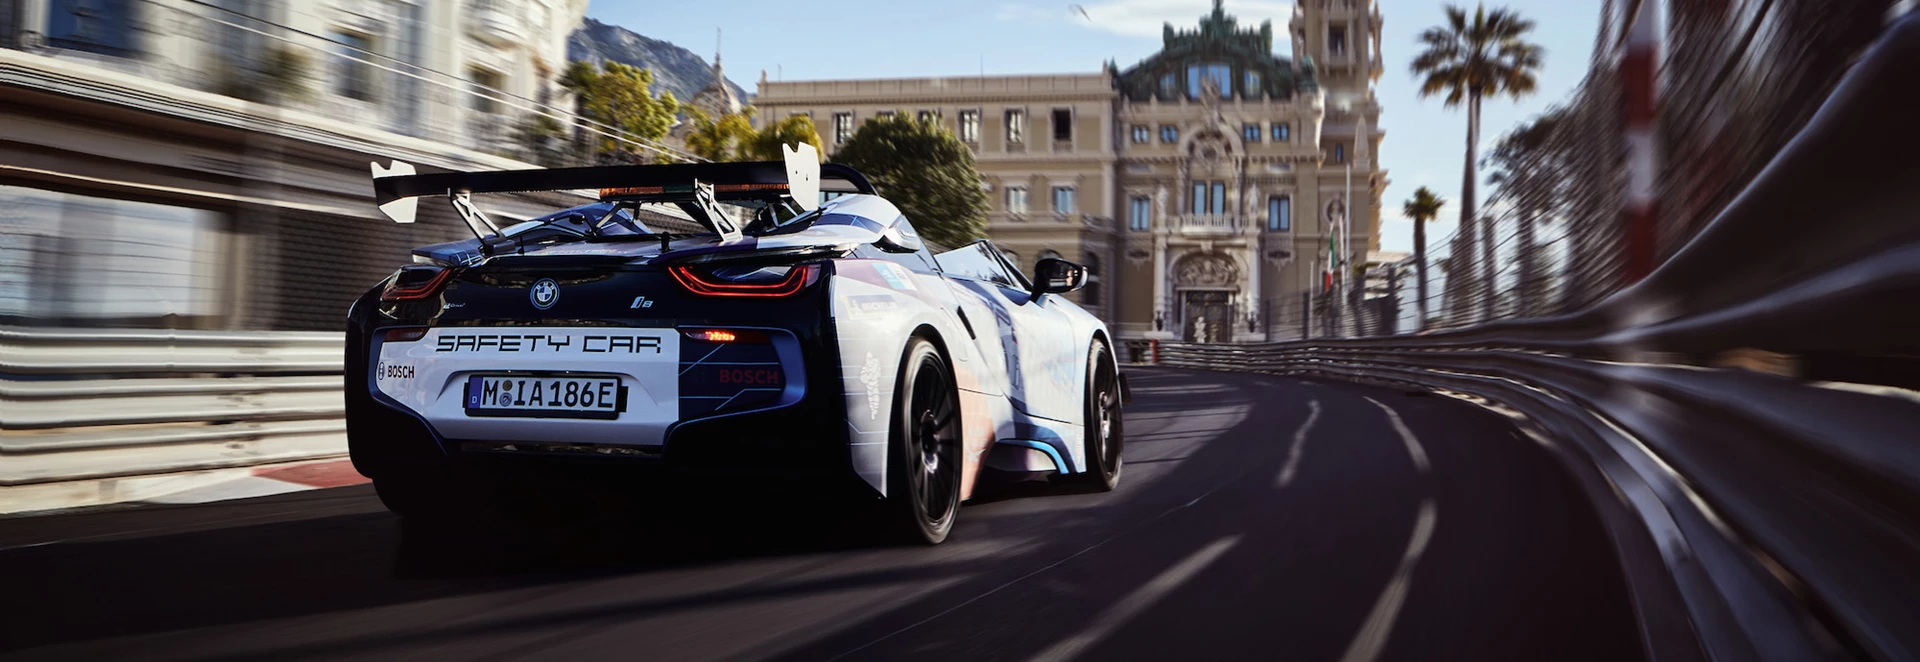 Formula E’s new safety car is a stunning modified BMW i8 Roadster 